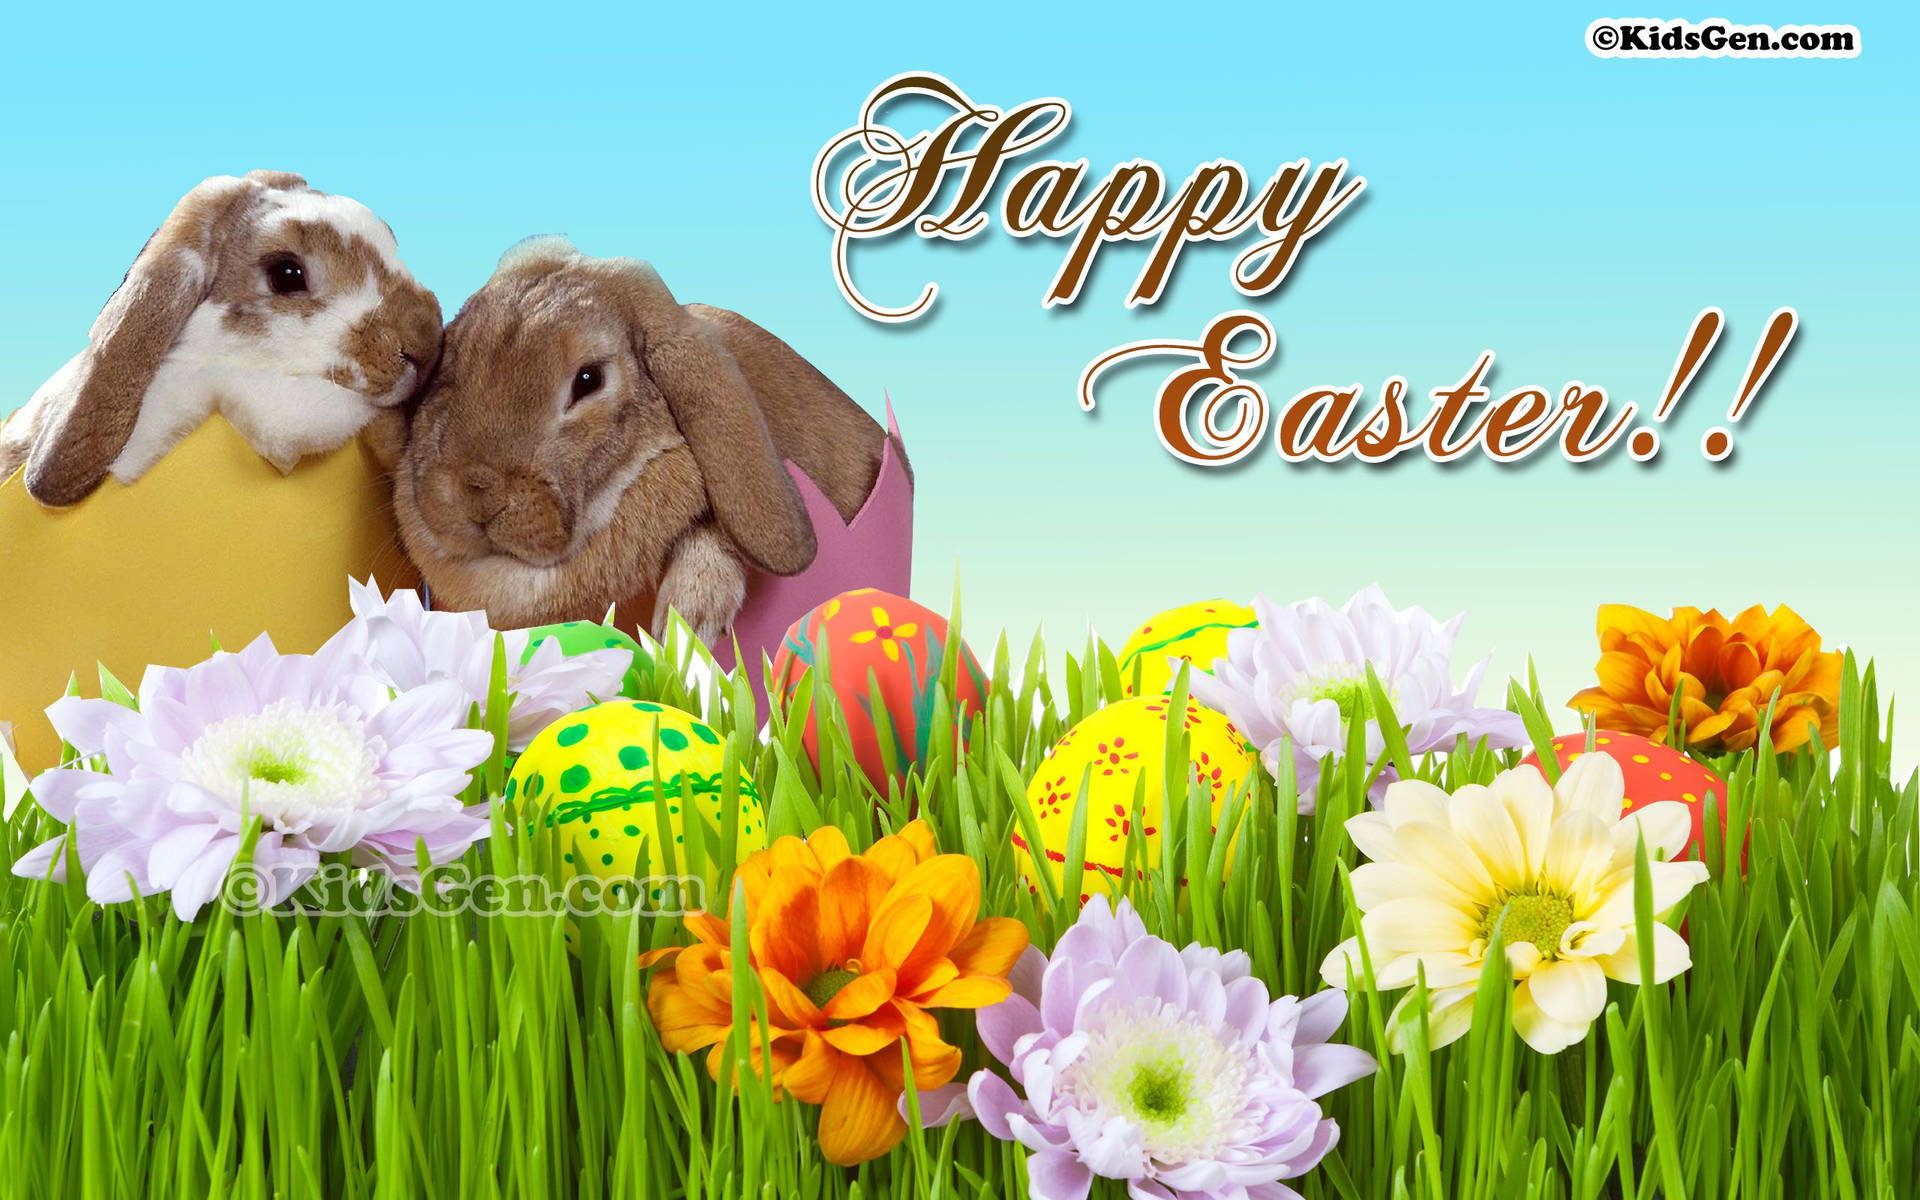 Celebrate Easter with a Colorful Rabbit and Egg Themed Festivity Wallpaper